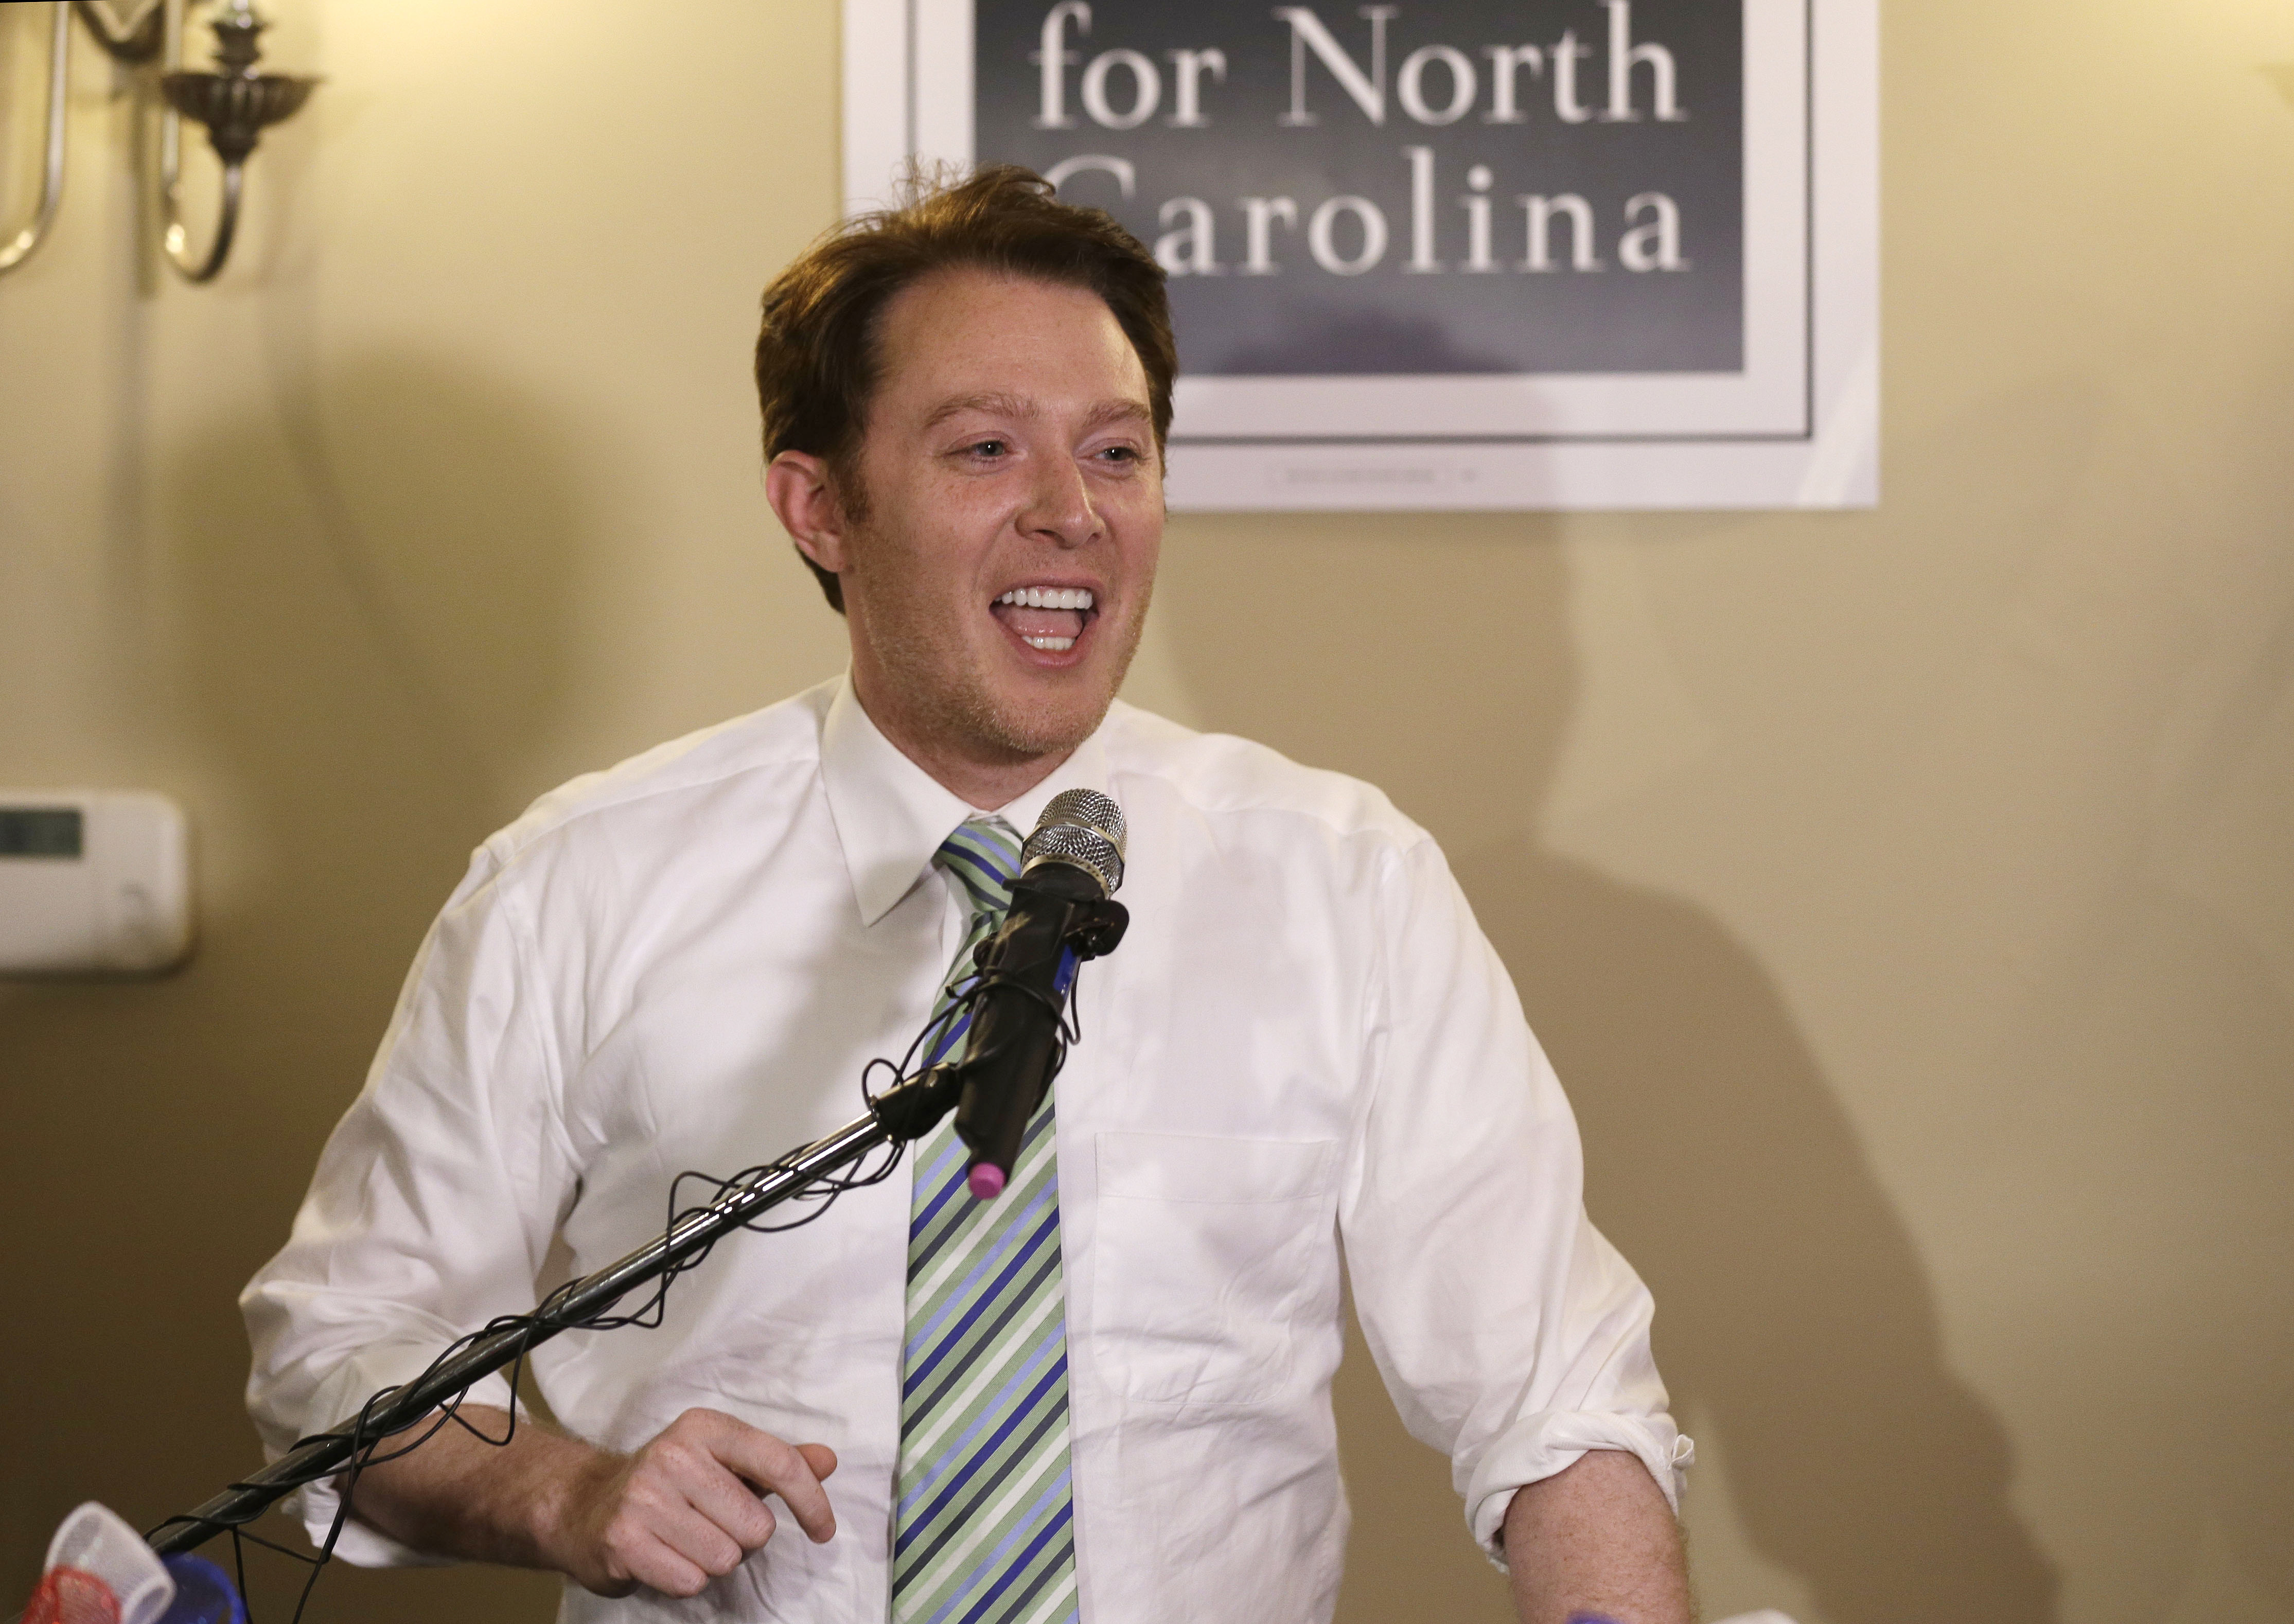 Clay Aiken speaks to supporters during an election night watch party in Holly Springs, N.C., Tuesday, May 6, 2014. (Gerry Broome&amp;mdash;AP)